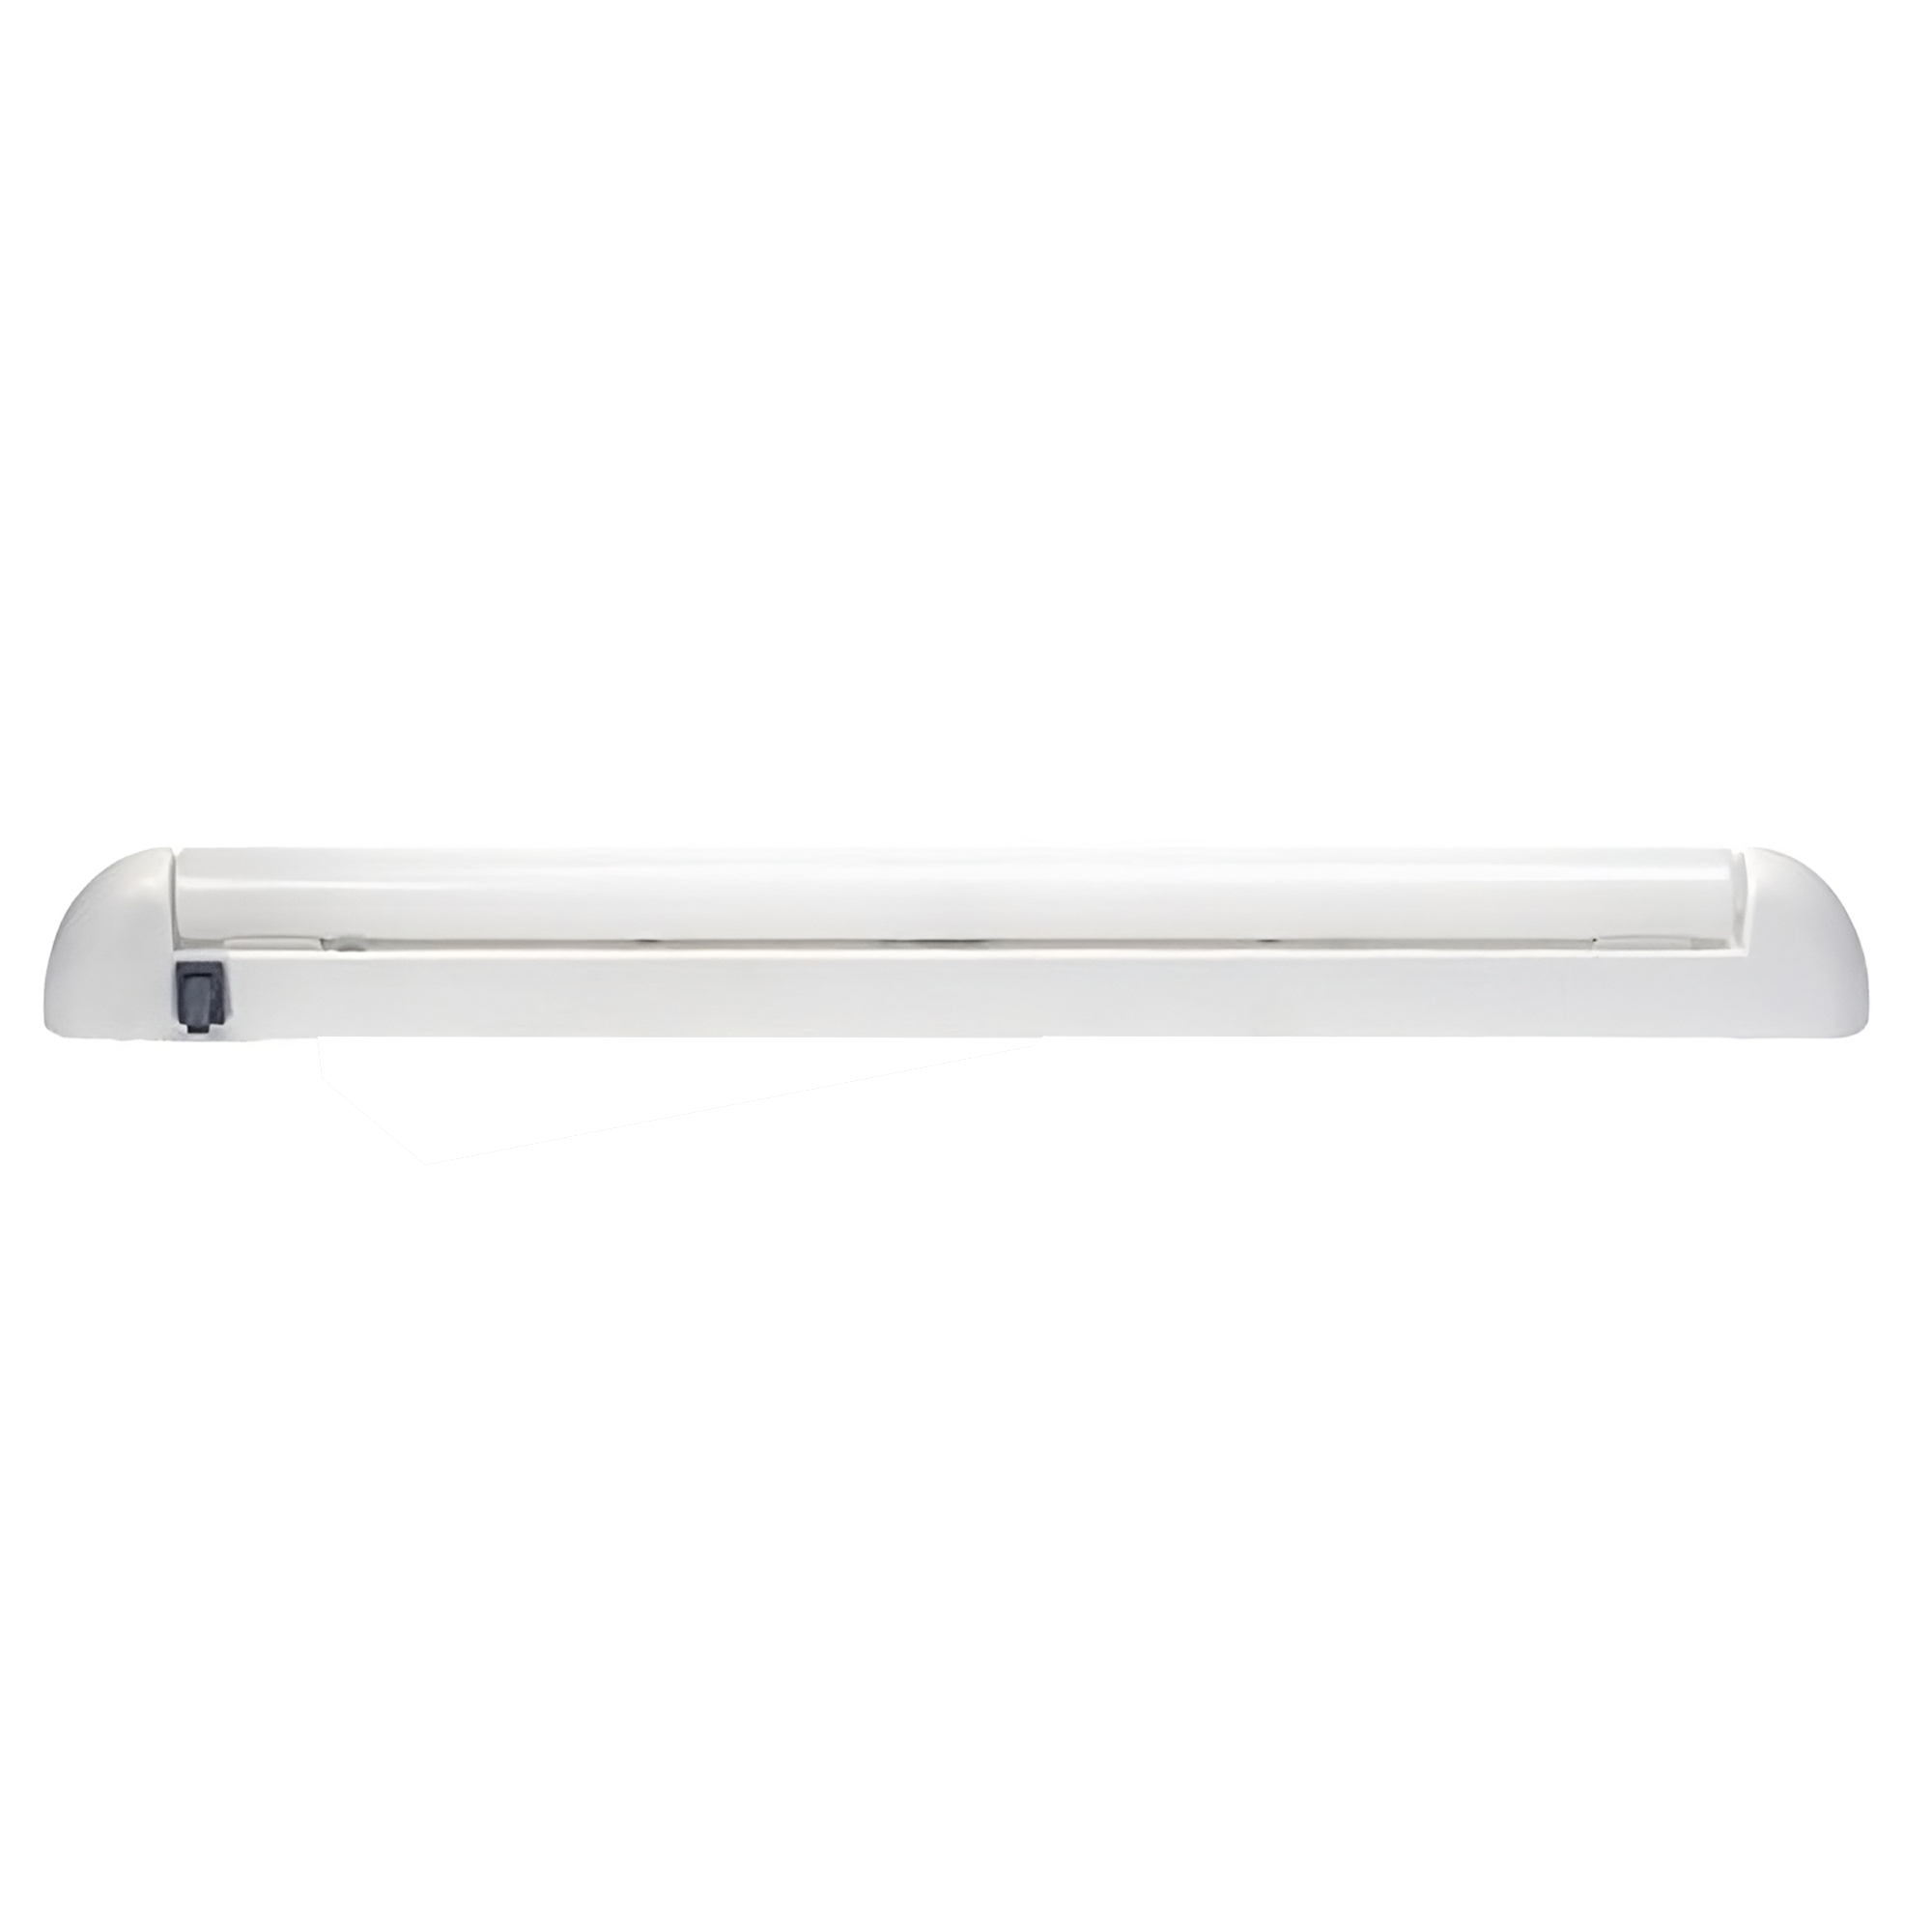 Product image of Streamline 600mm LED Striplight with Door Switch